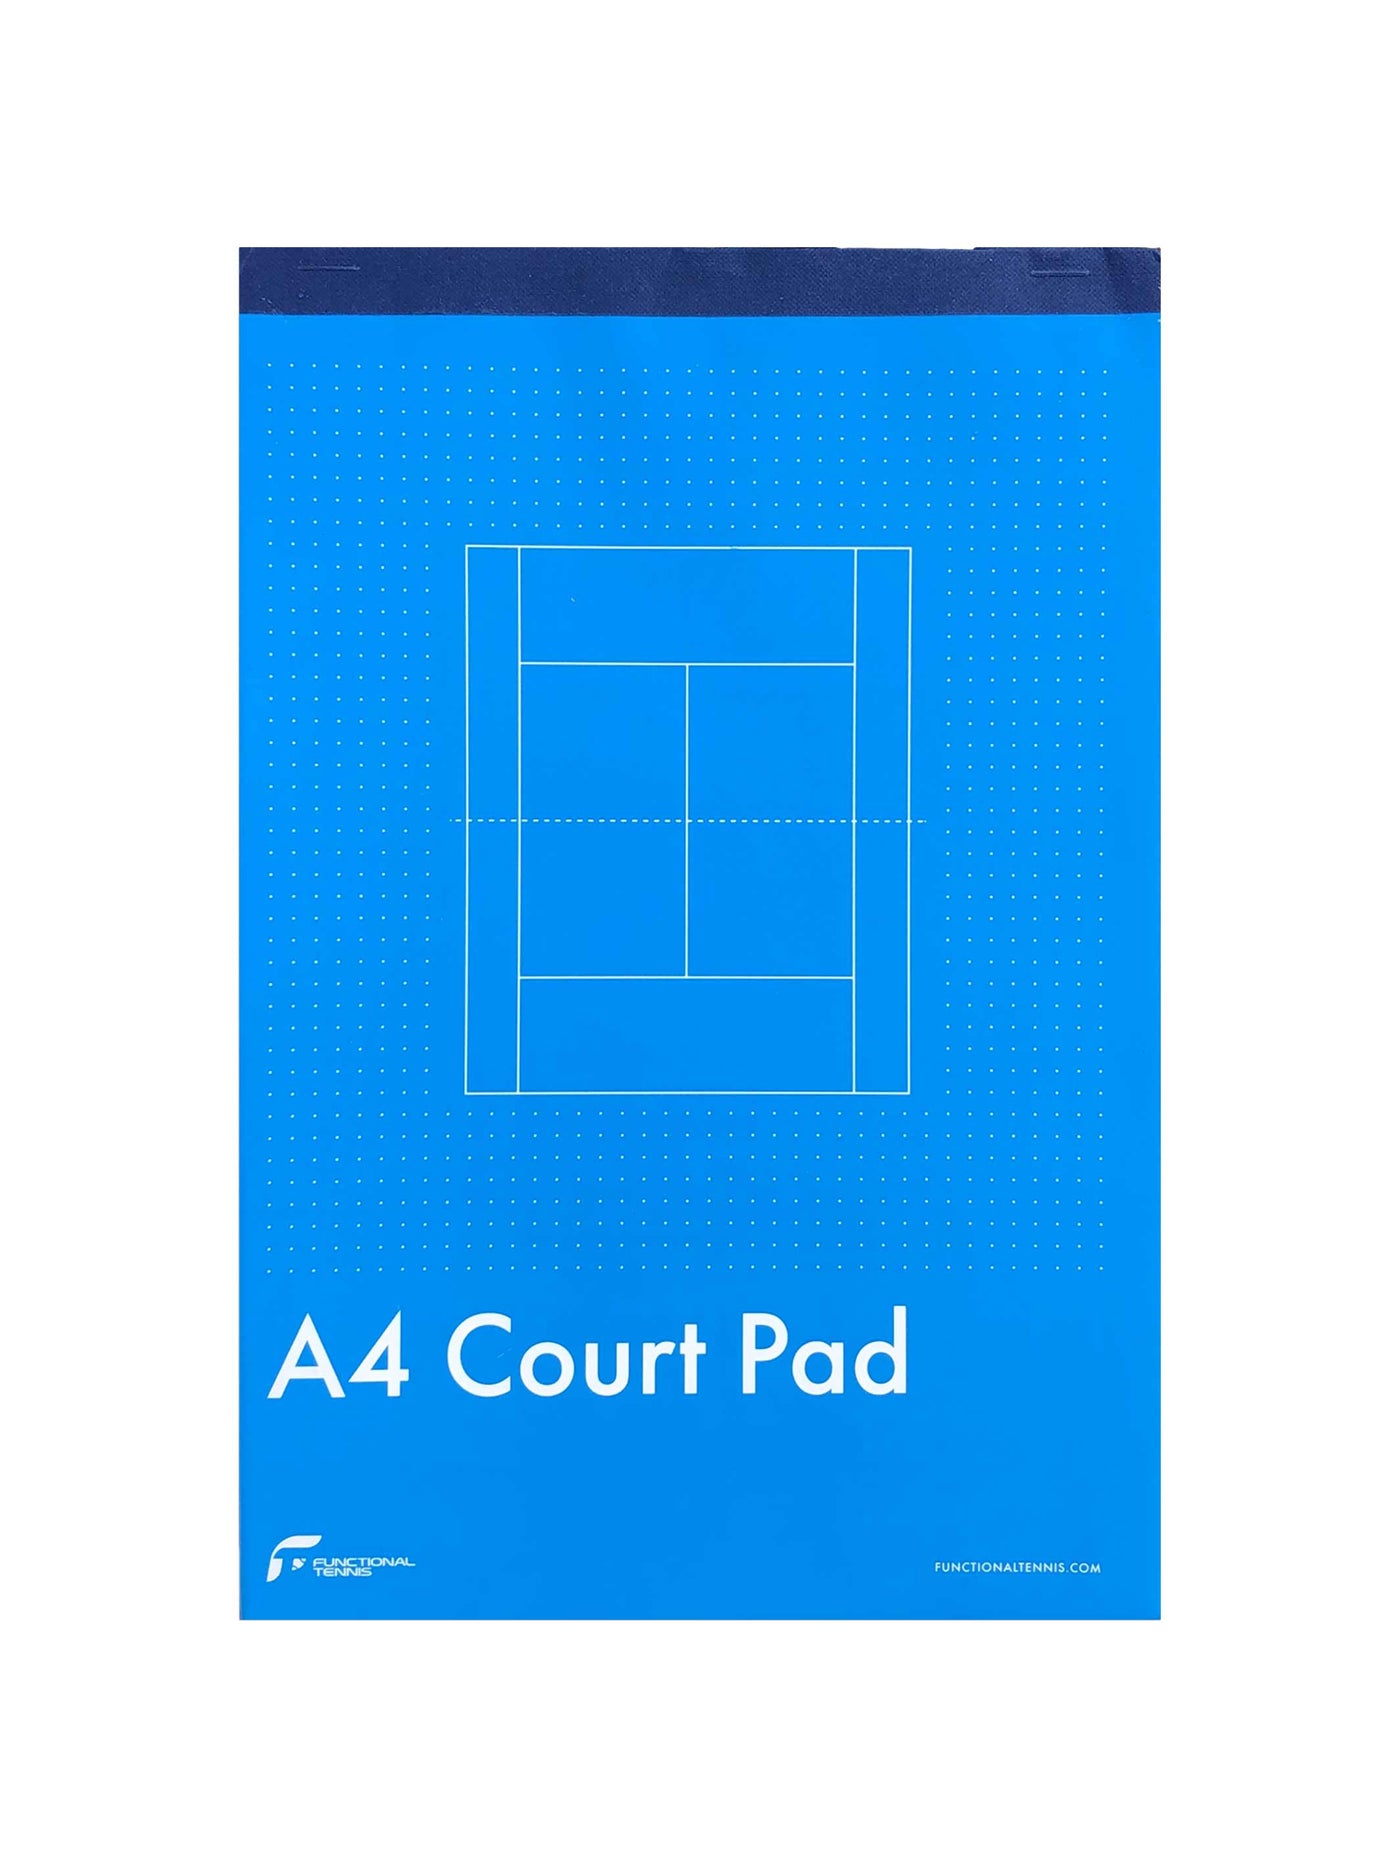 The Court Pad